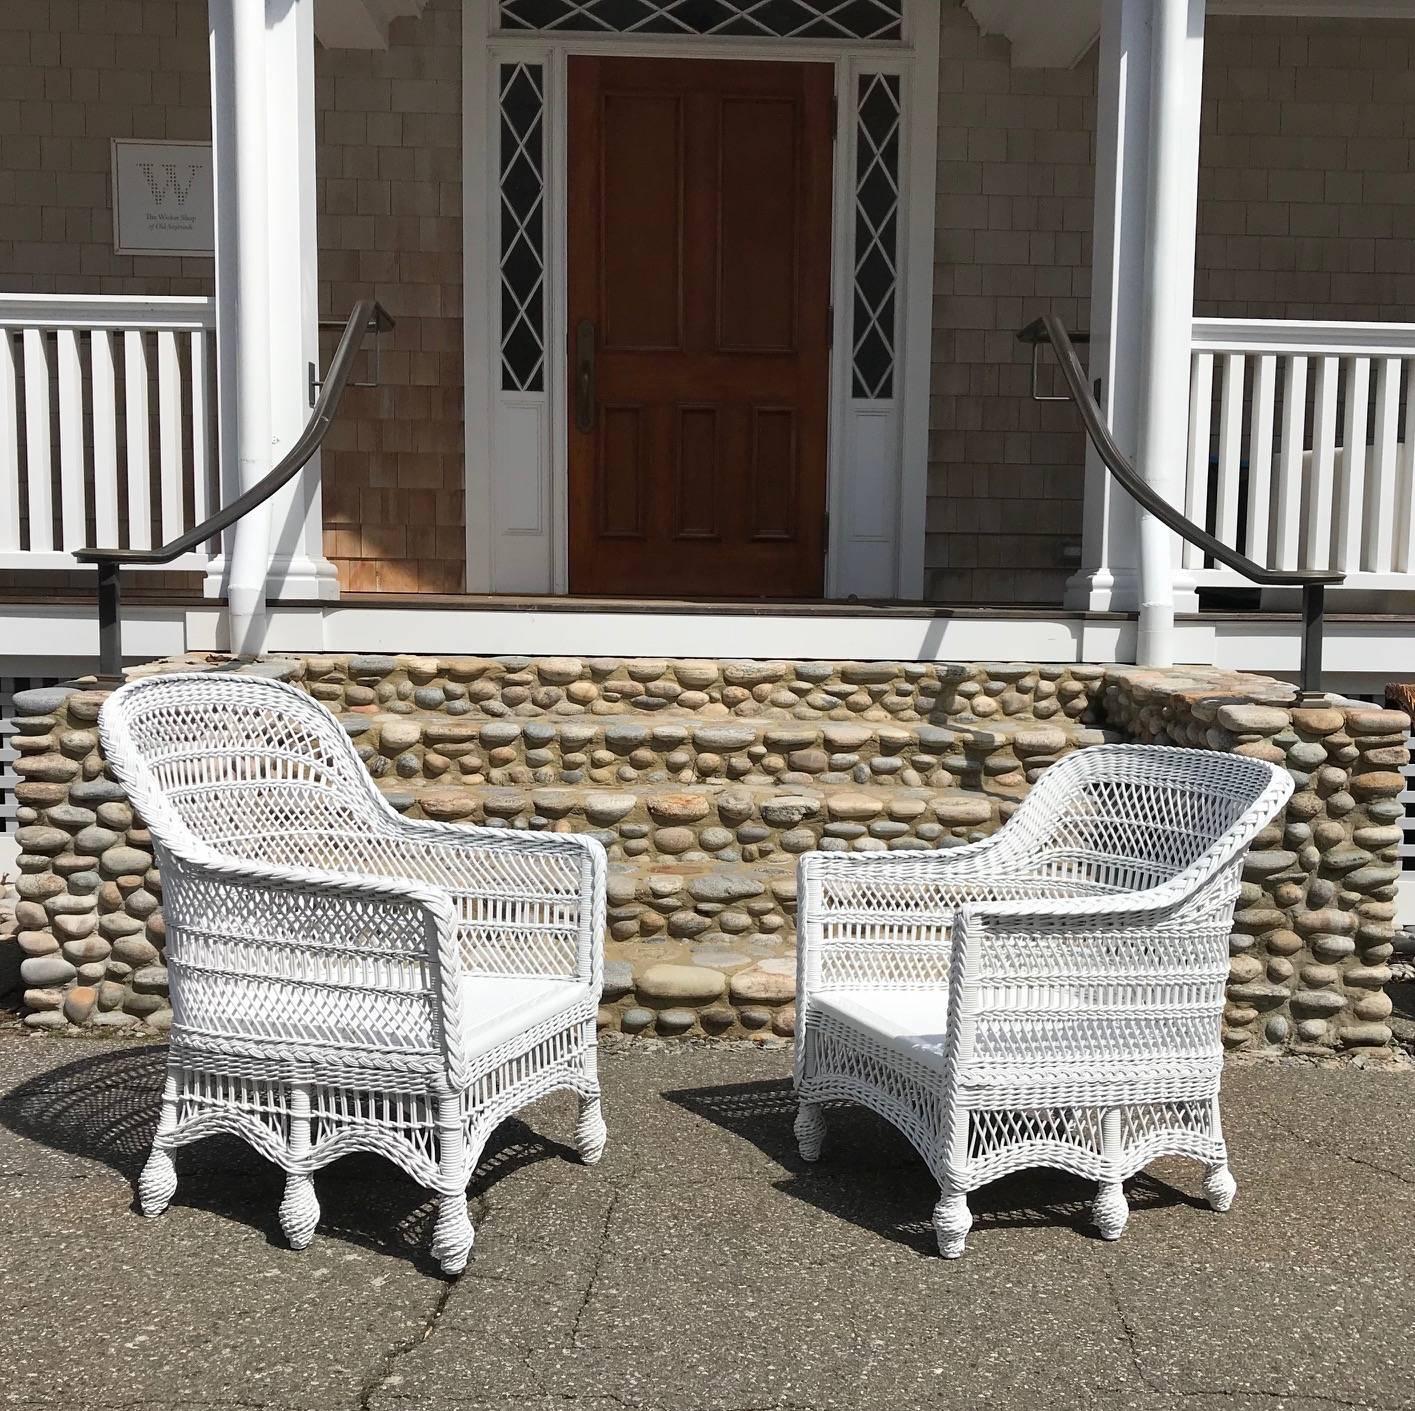 Beautiful and rare antique wicker chairs with six legs and pressed cane seats. These chairs were intricately woven by hand at the turn of the century. These chairs have been freshly painted white. They are very similar but not identical. Chair #1